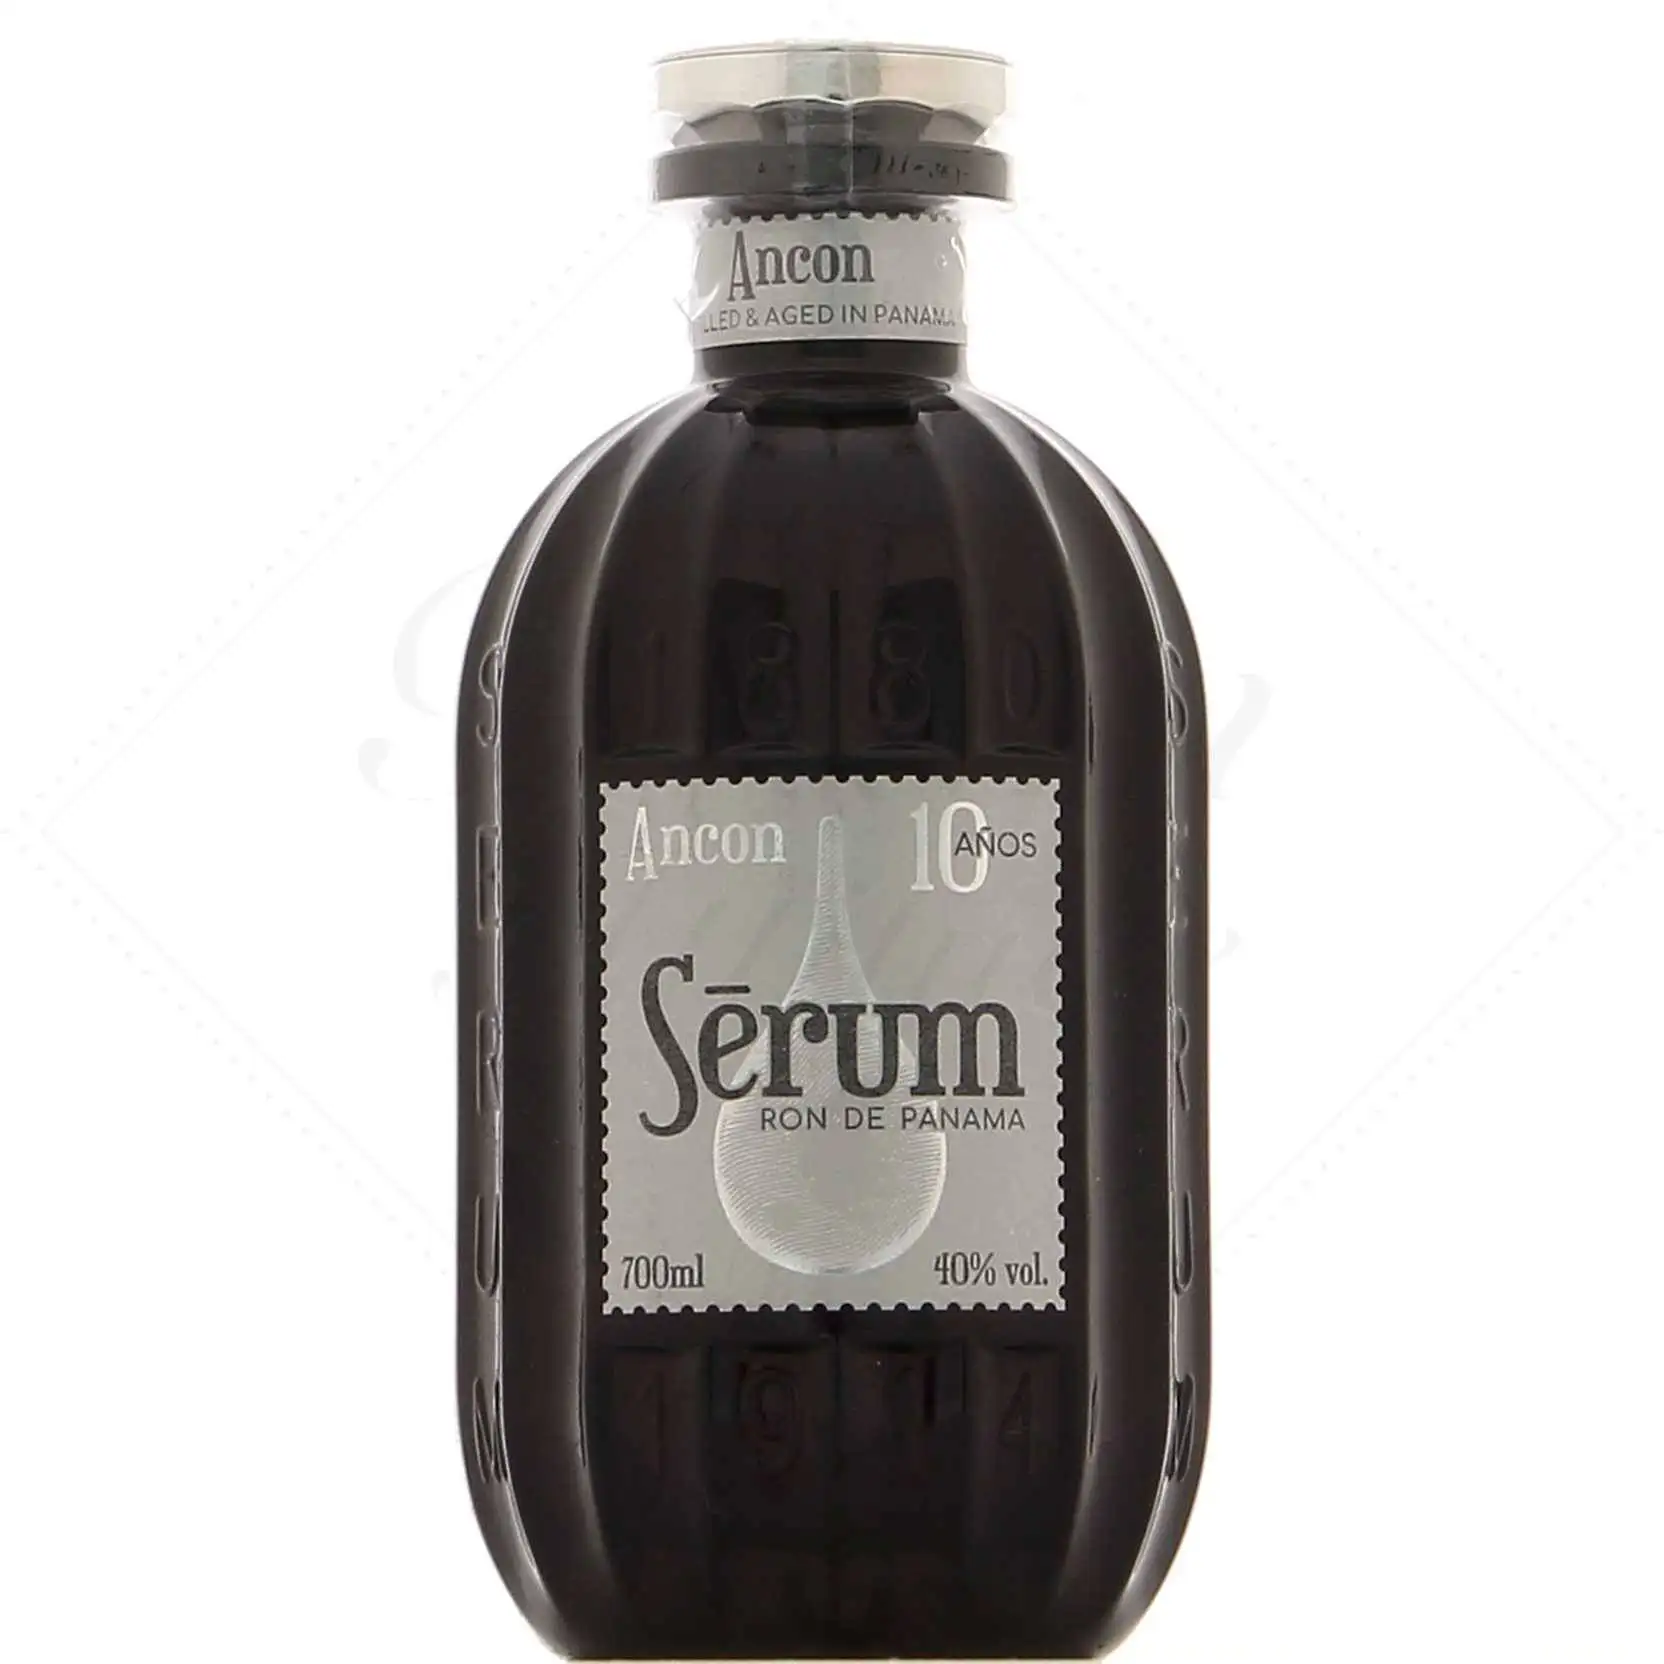 Image of the front of the bottle of the rum SéRum Ancon 10 Años